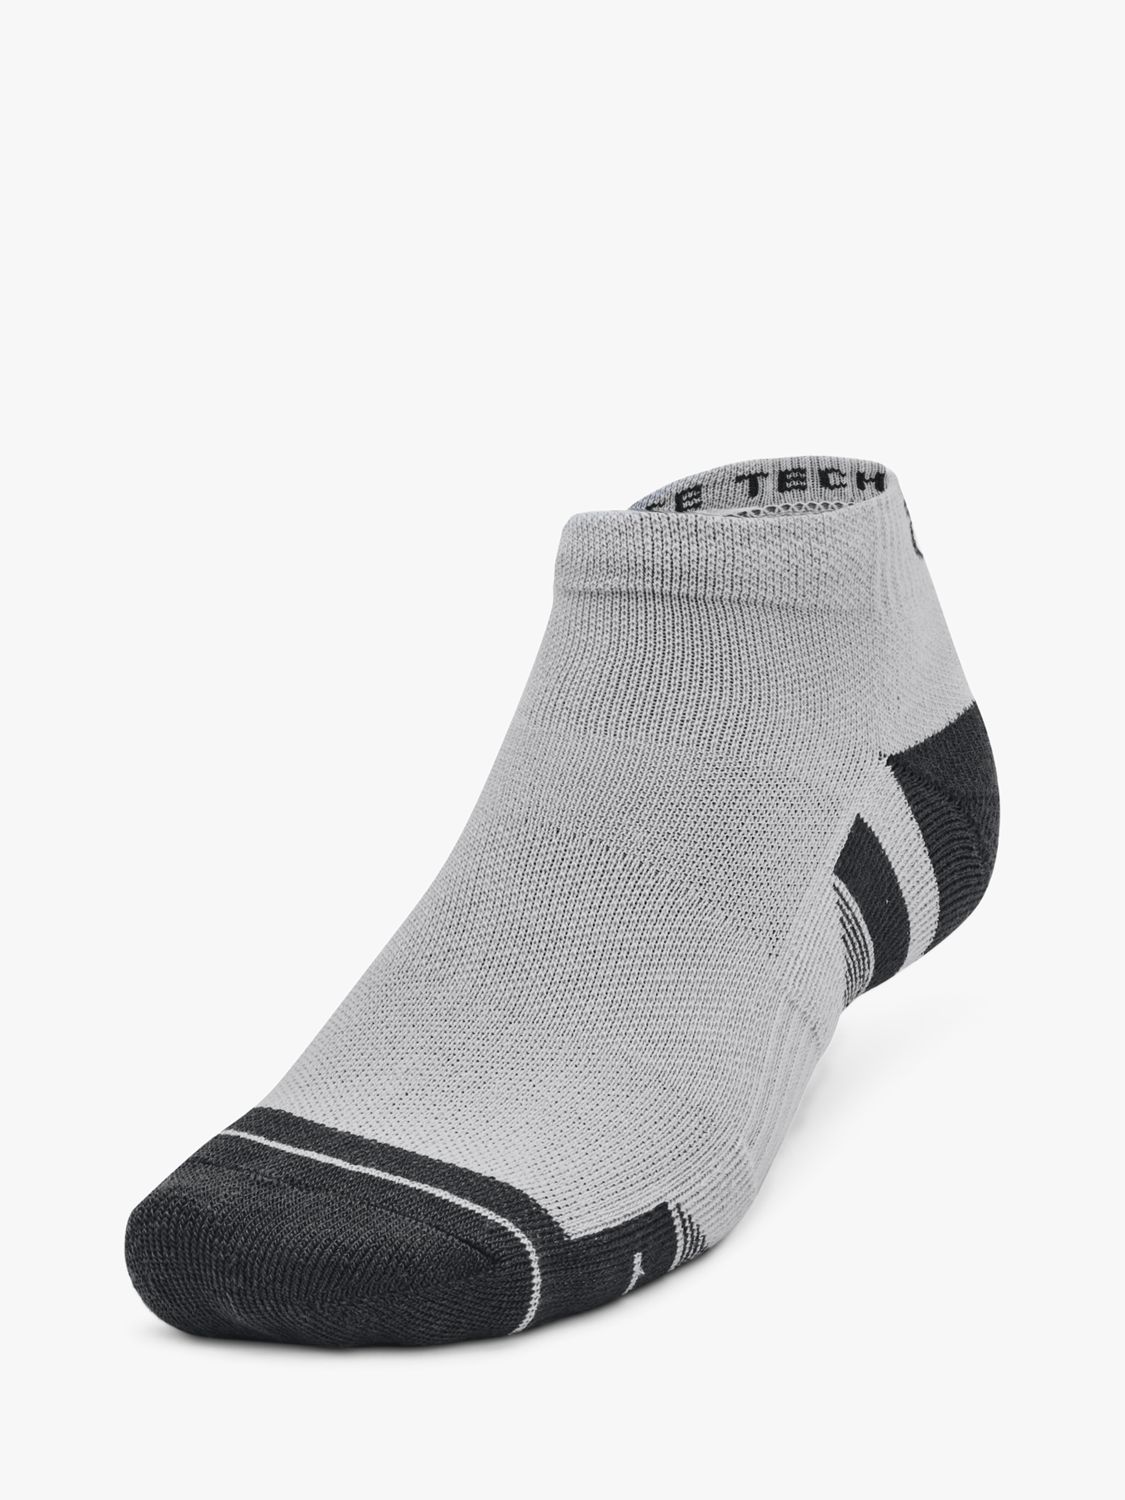 Under Armour Performance Tech Low Cut Socks, Pack of 3, Mod Gray/White ...